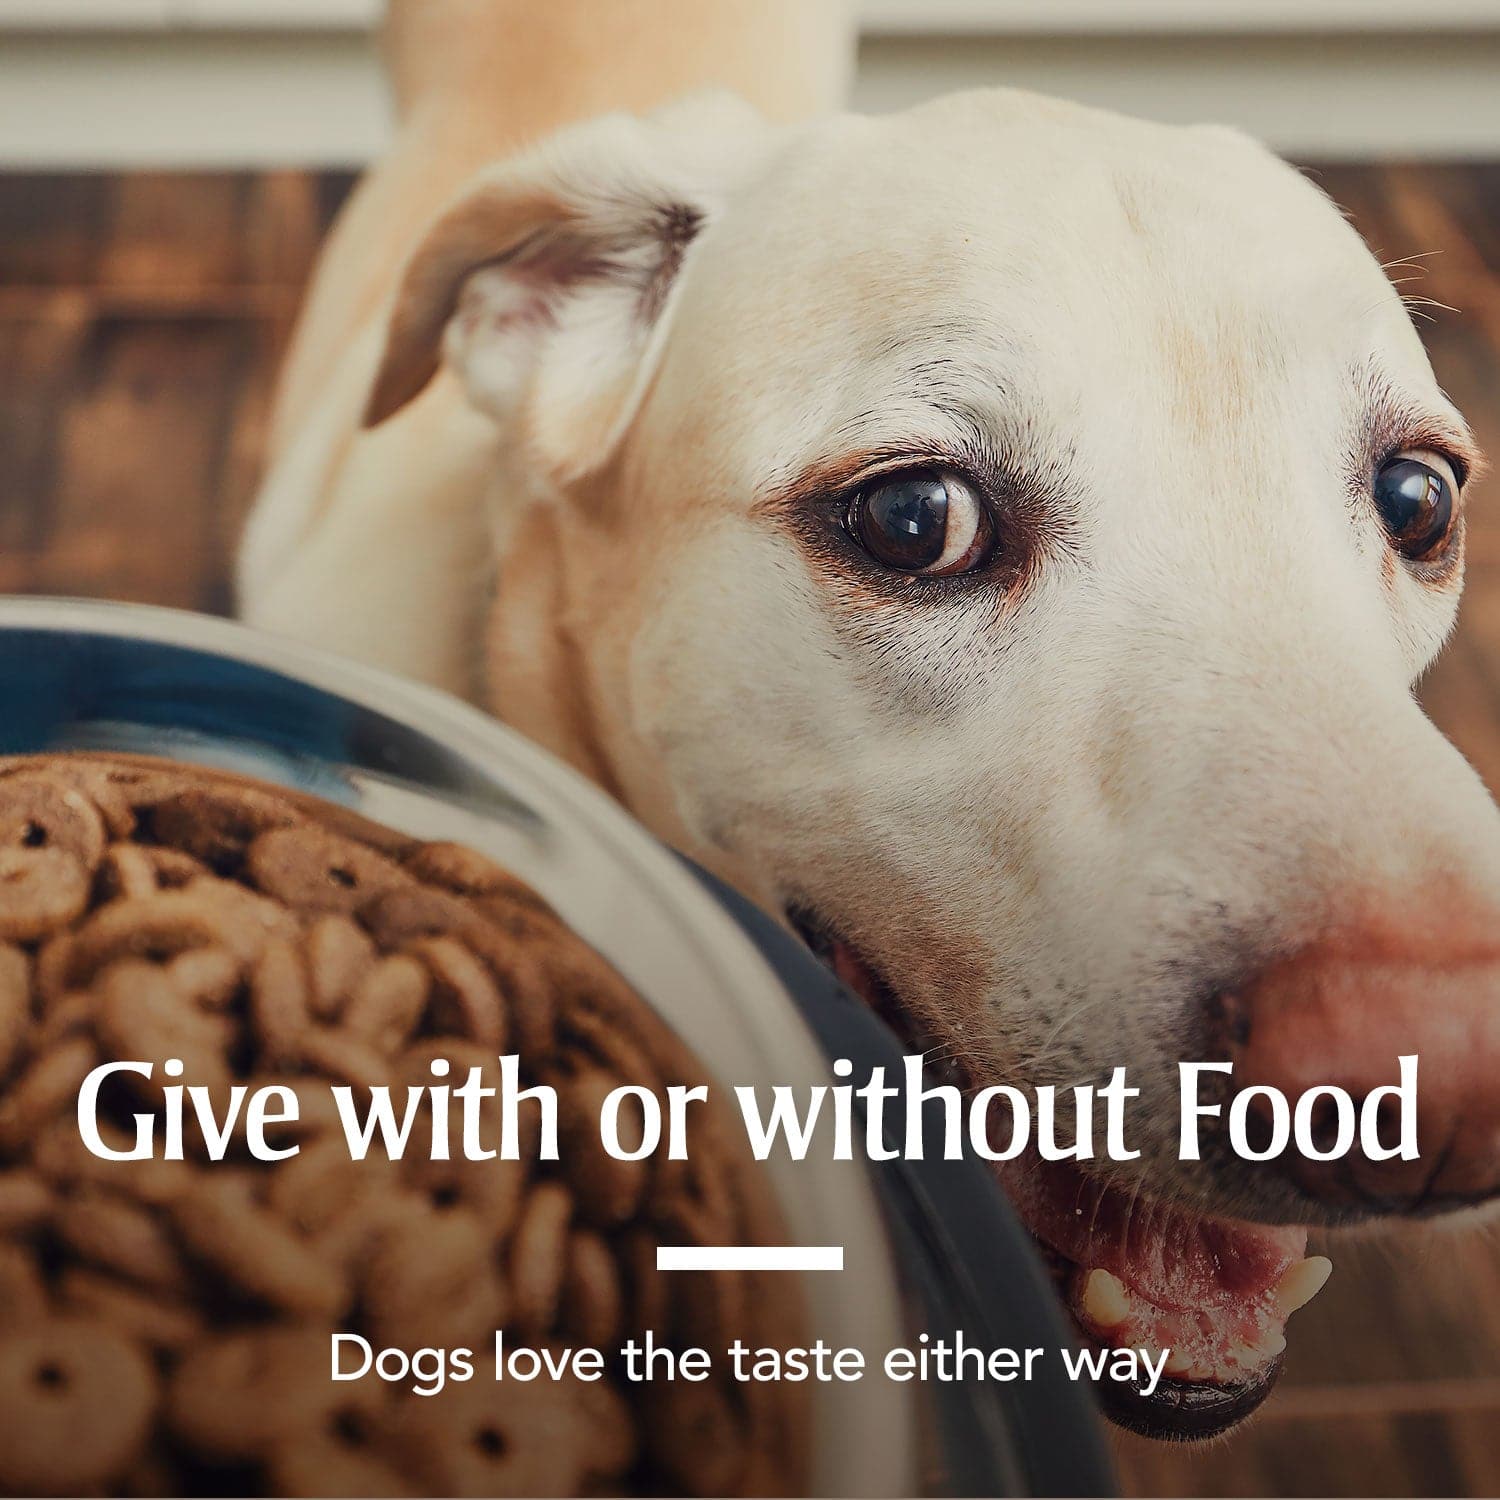 give with or without food for 2 / Medium & Large Dogs & 6 / Medium & Large Dogs